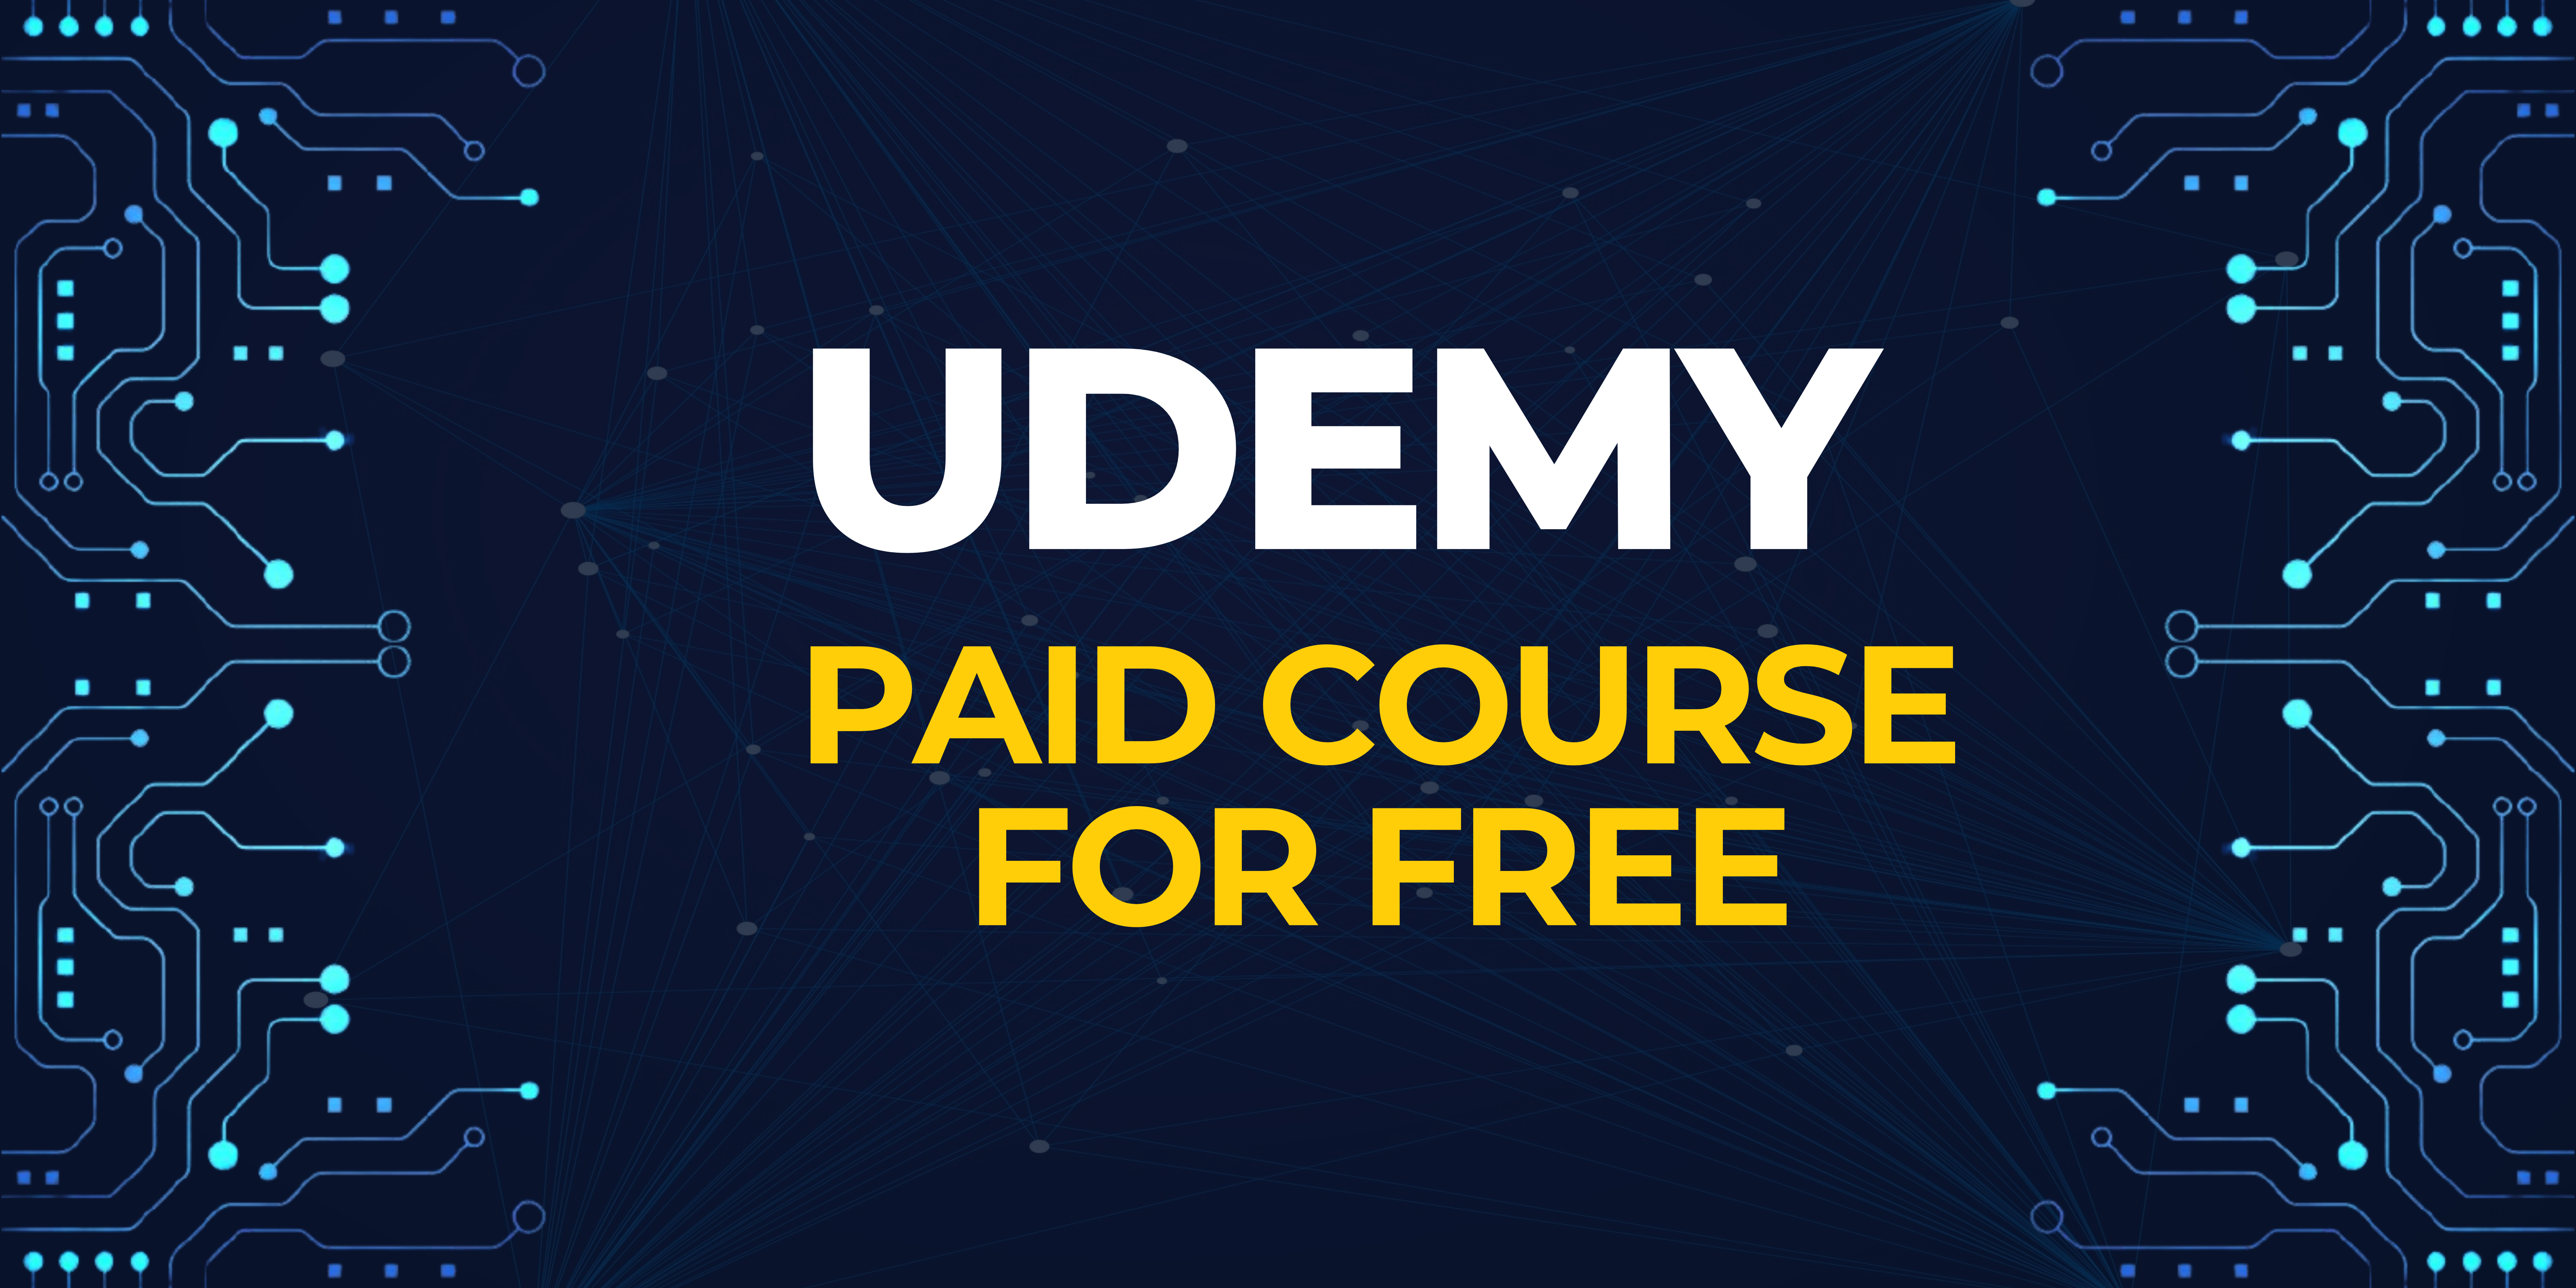 download udemy paid course for free